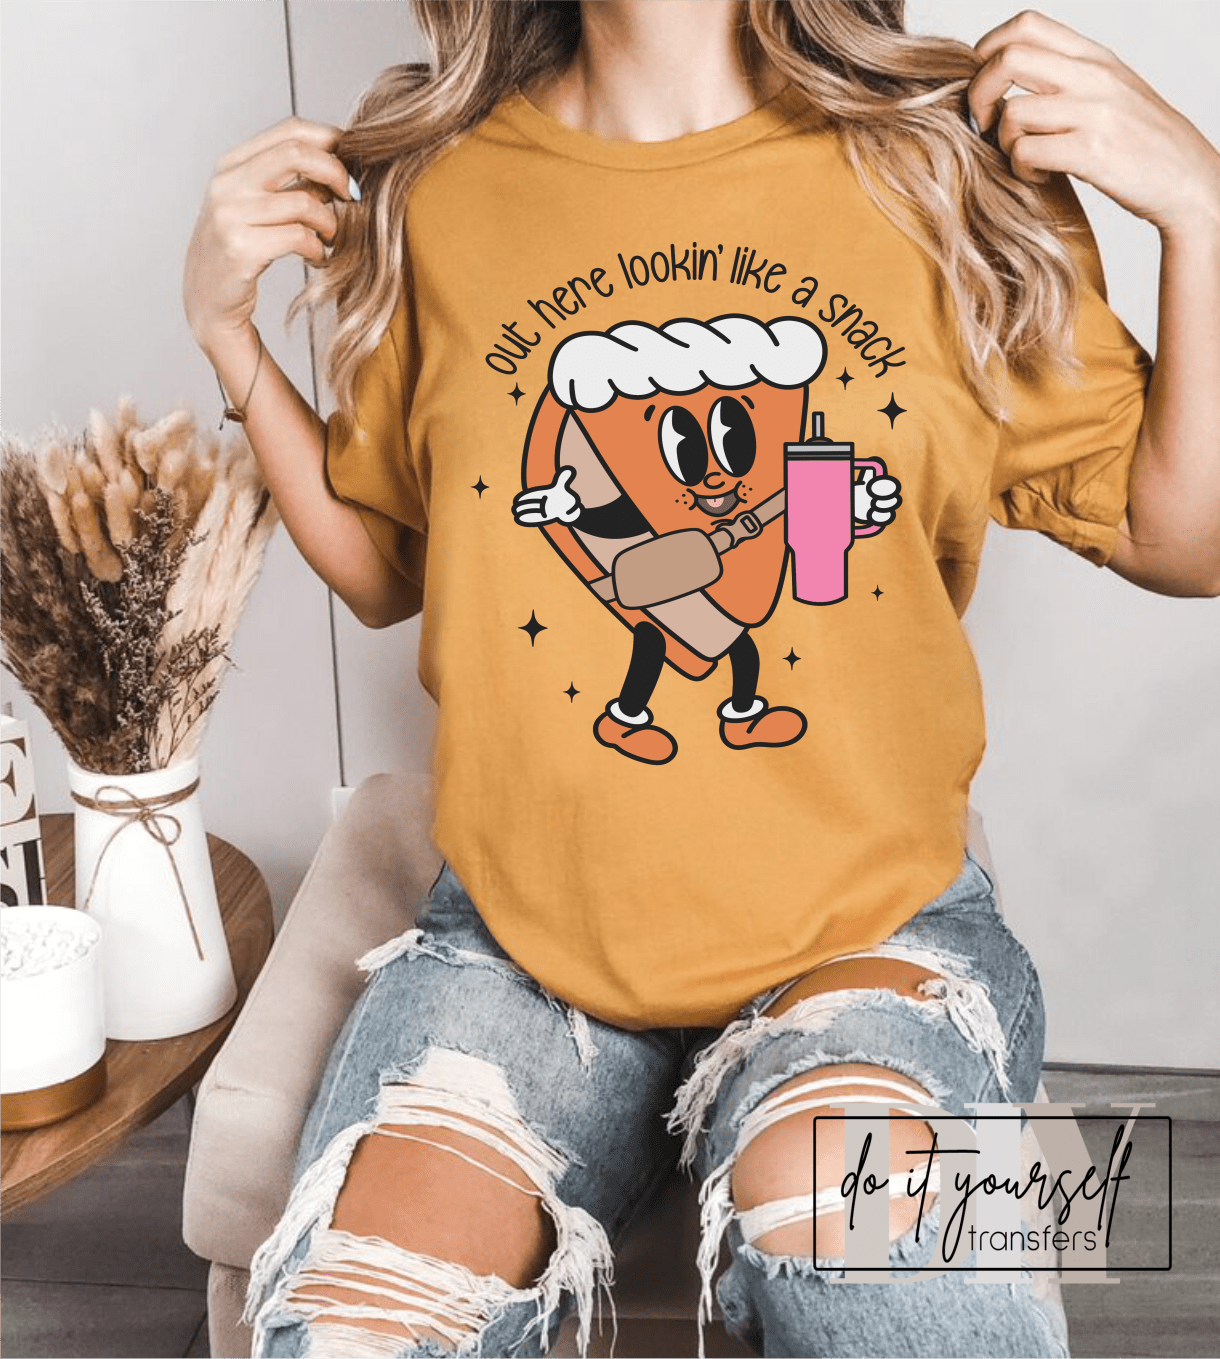 Out here lookin' like a snack Pumpkin pie Thanksgiving cup ADULT DTF TRANSFERPRINT TO ORDER - Do it yourself Transfers